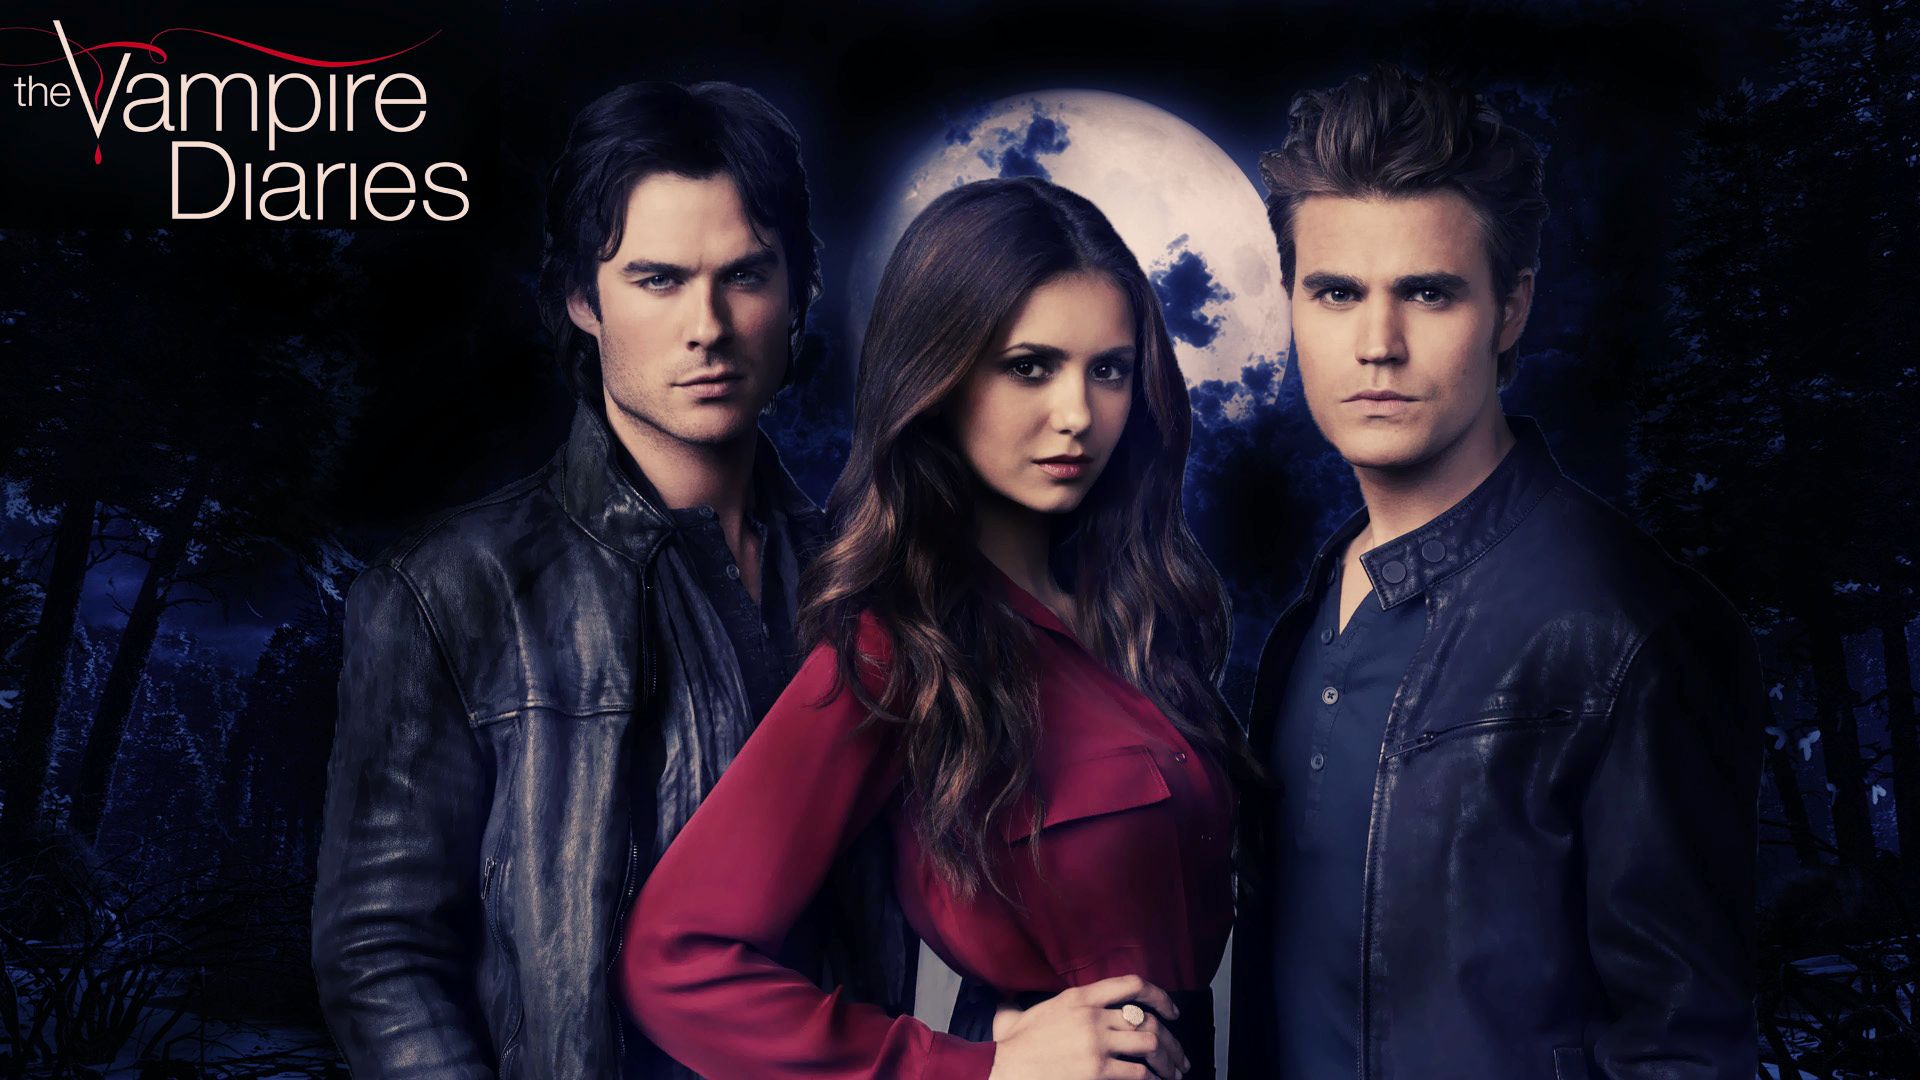 Nina Dobrev Quits from The Vampire Diaries - Daily Gossip Online